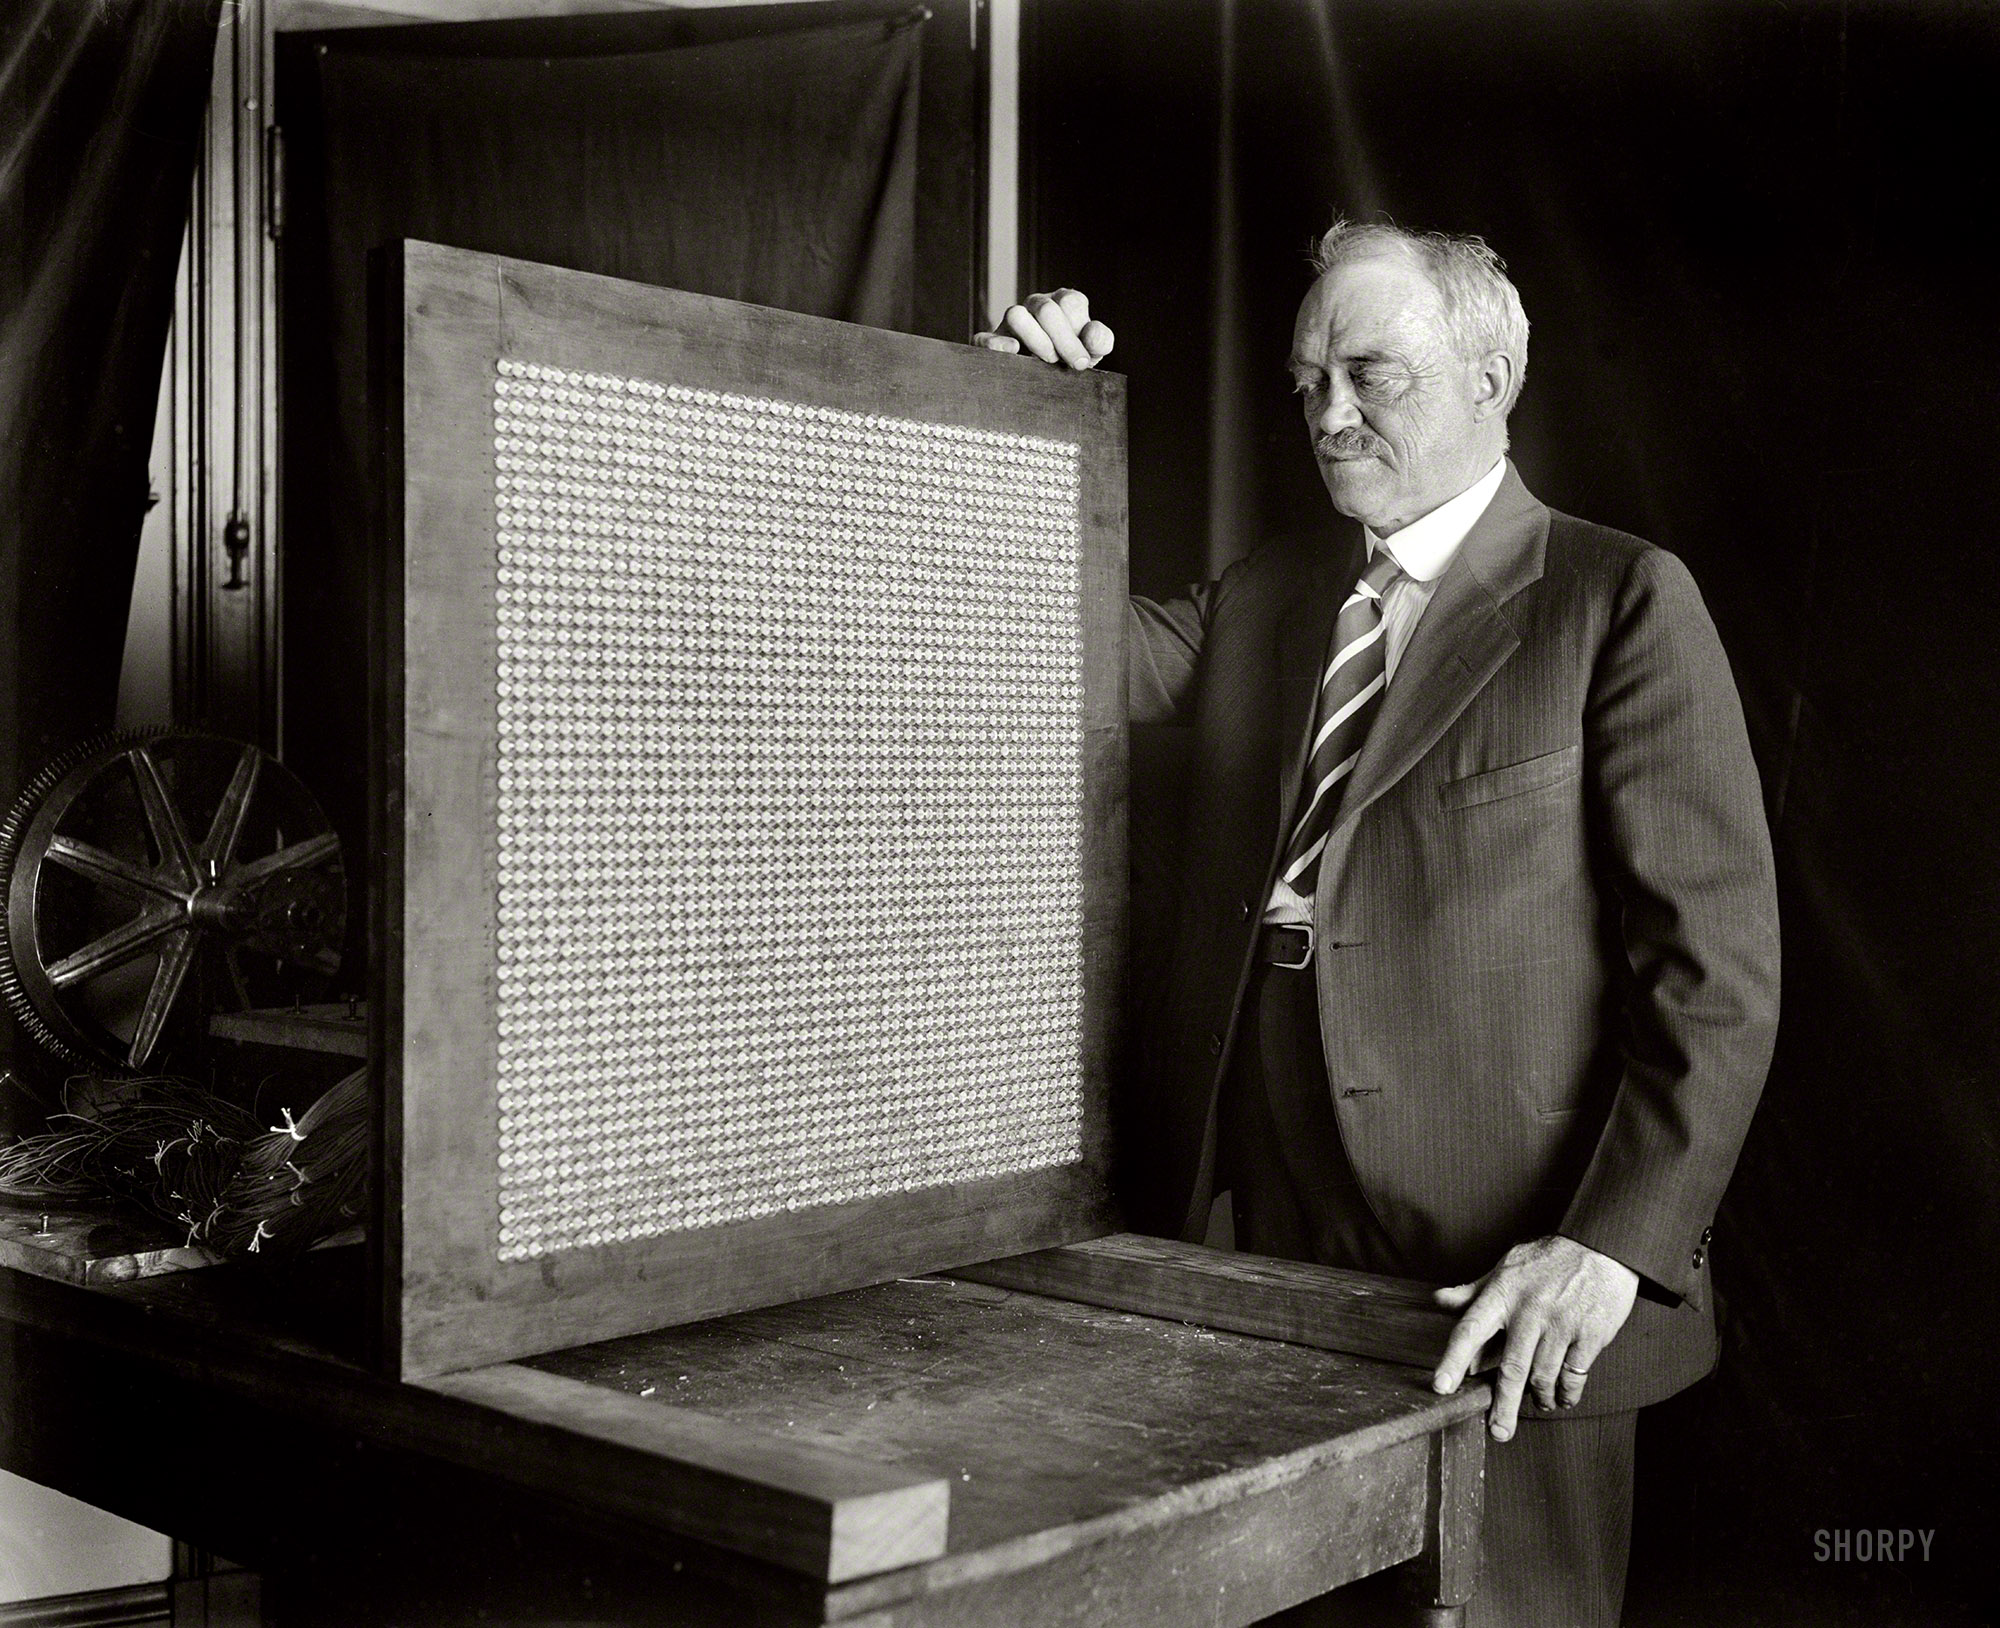 JoeH has identified the mystery man as Washington inventor and television pioneer Charles Francis Jenkins (1867-1934), pictured here with what might be considered an early flat-panel video display, its 48-pixel-square grid composed of small neon lamps.
Washington, D.C., in 1928. "NO CAPTION" is the caption for this one; again we turn to the crowd-source wisdom of the Shorpy masses to inquire: What the heck is it? (Close-up here.) Harris & Ewing Collection glass negative. View full size.